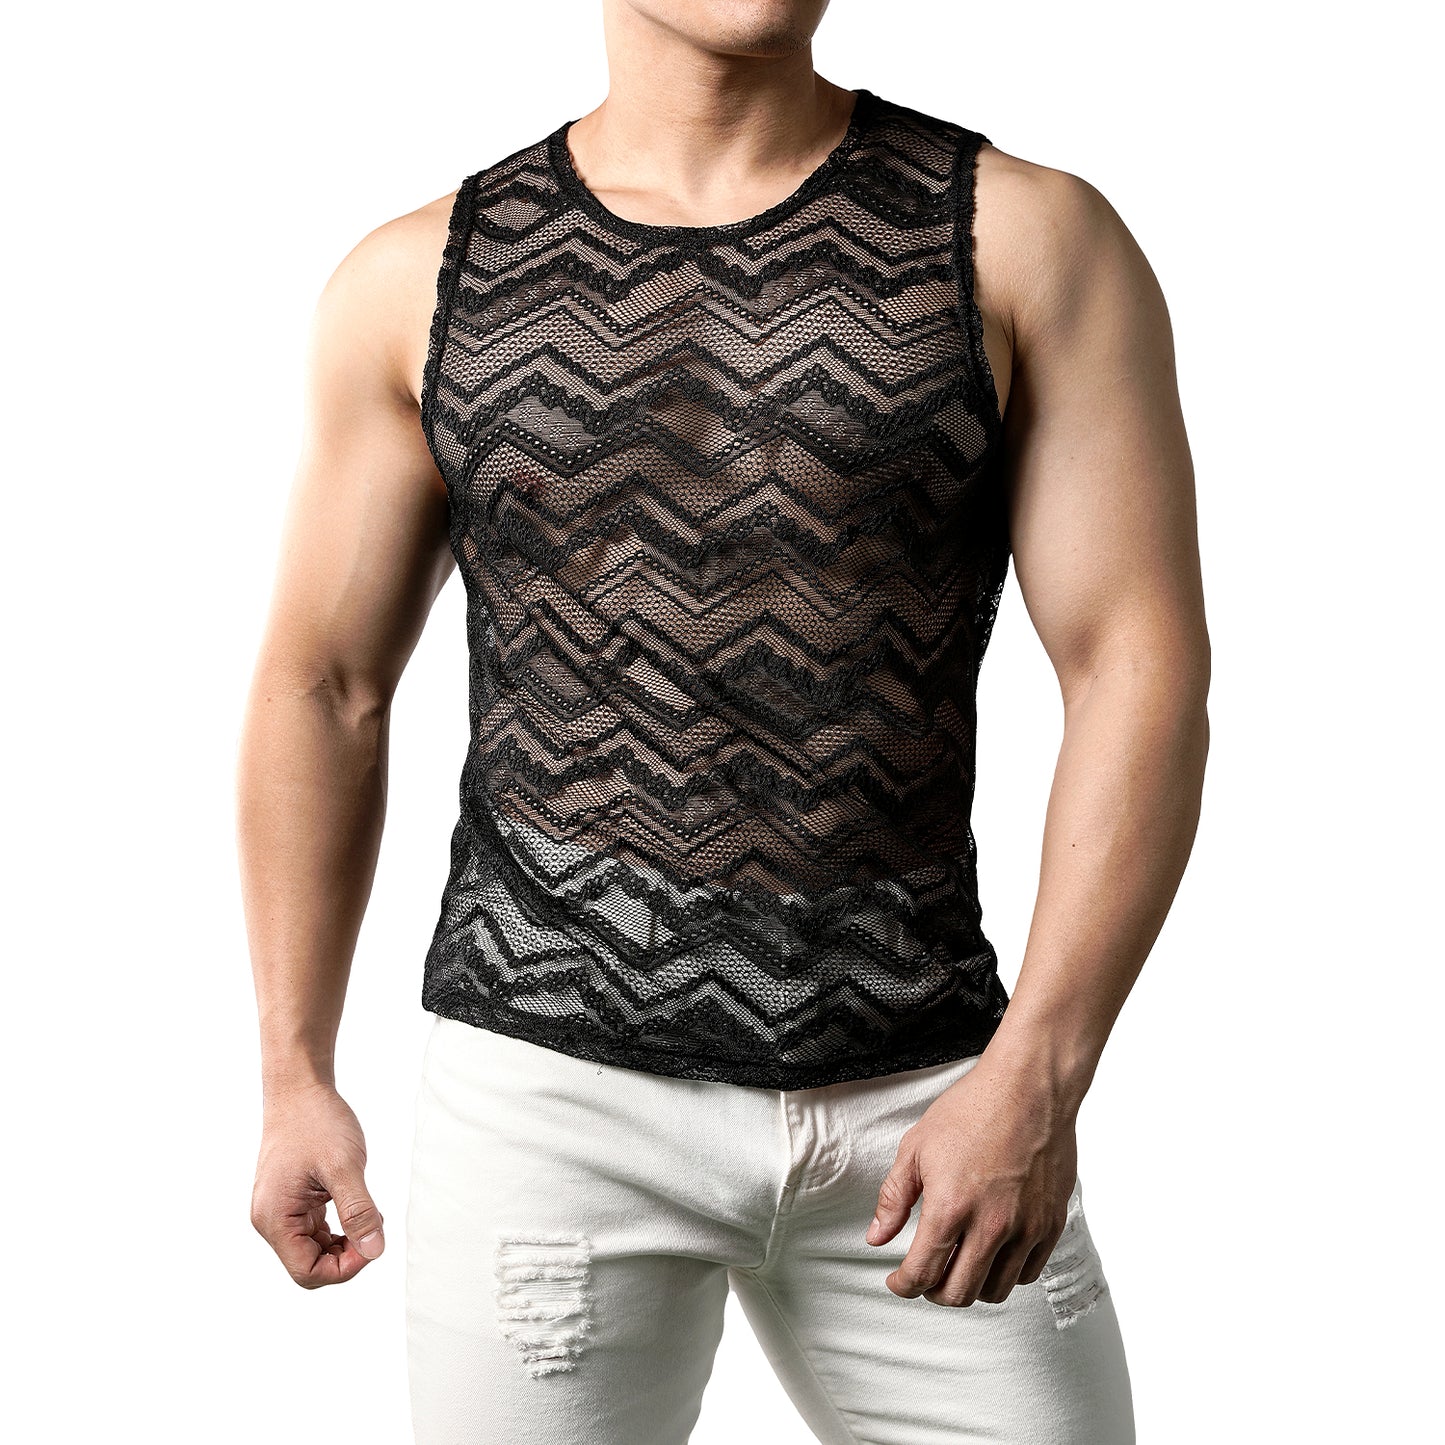 JOGAL Mens See Through Lace Shirts Sleeveless Muscle Tops